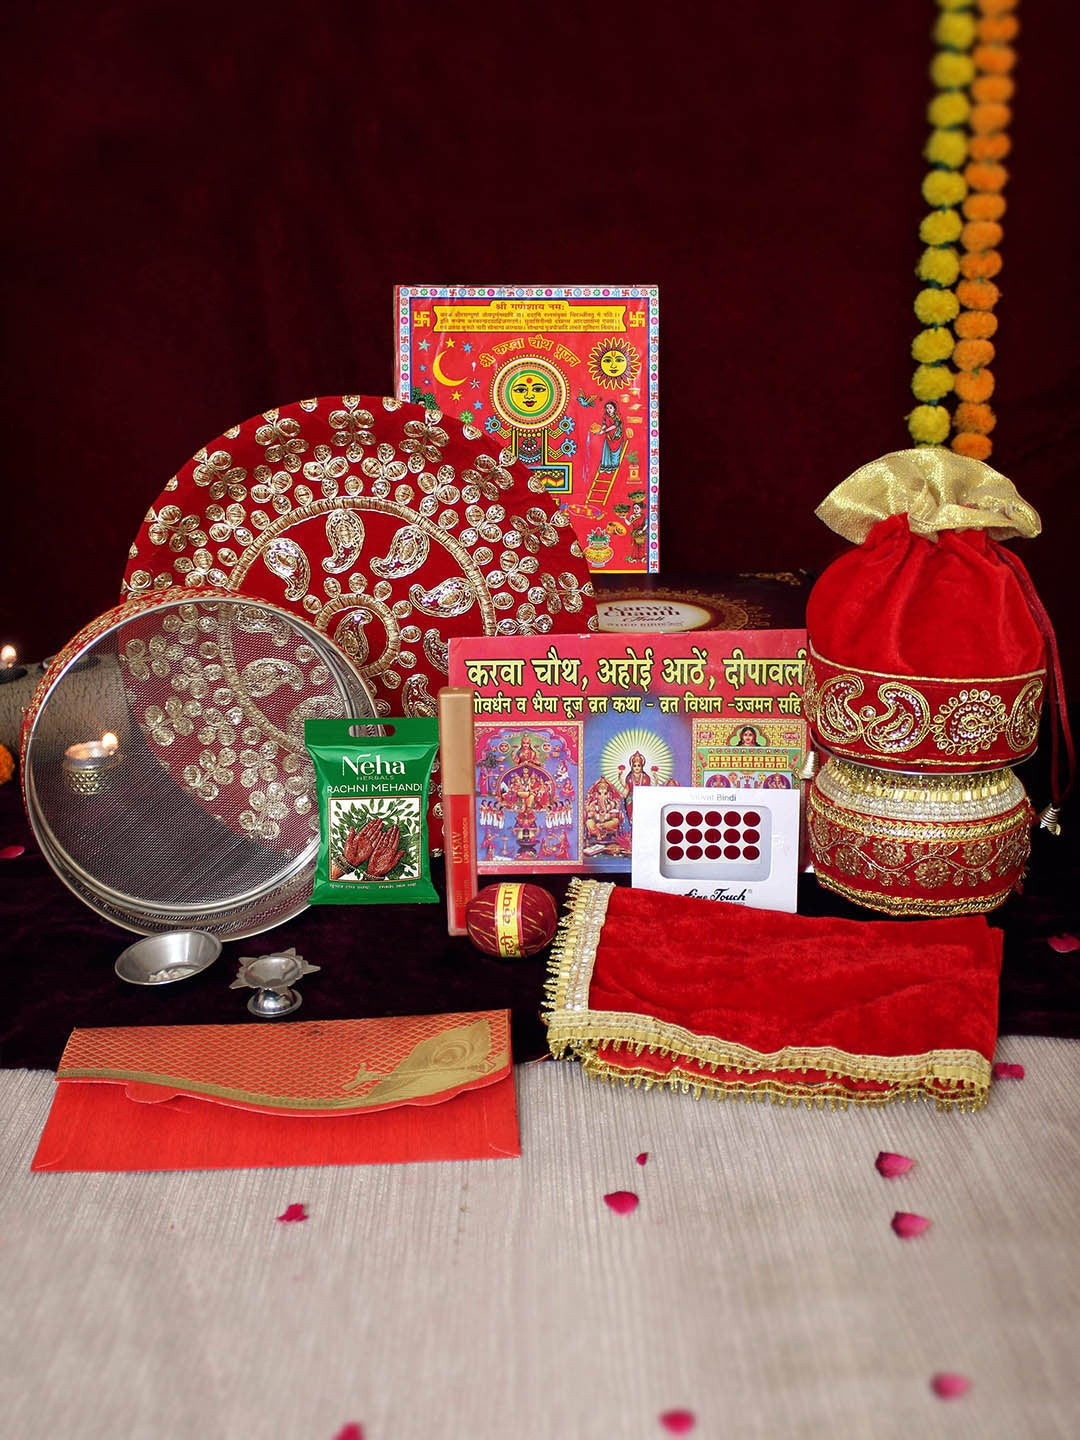 TIED RIBBONS Karwachauth Puja Thali Set with Cover Combo - Steel Thali Lota  Channi and Karwa Chauth Pooja Samagri Kit with Box - Gifts for Wife Sister  Mother In Law Friends :